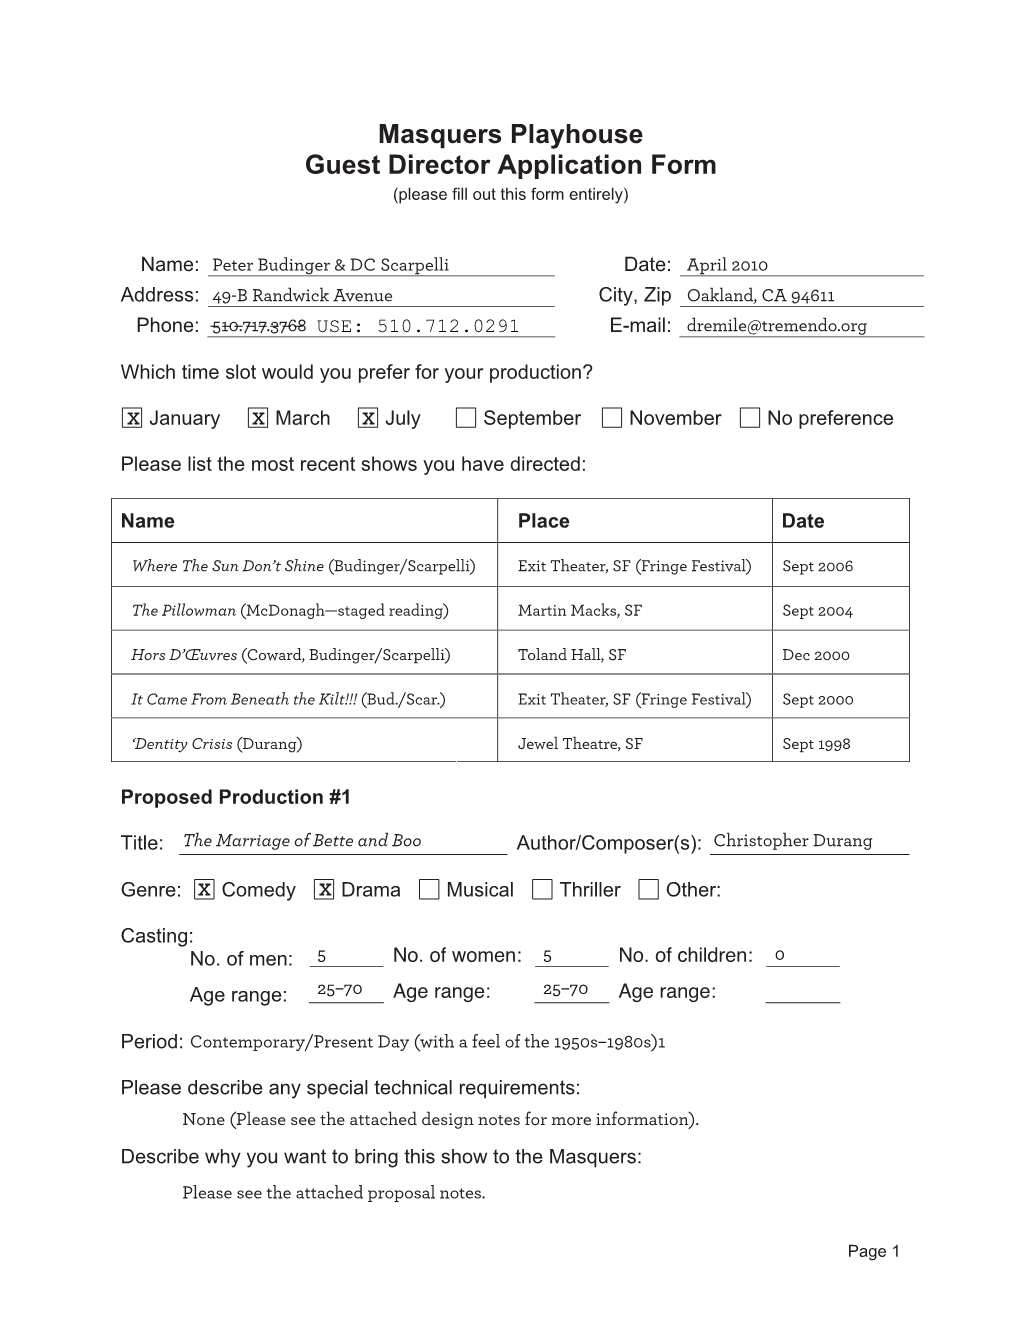 Masquers Playhouse Guest Director Application Form (Please Fill out This Form Entirely)